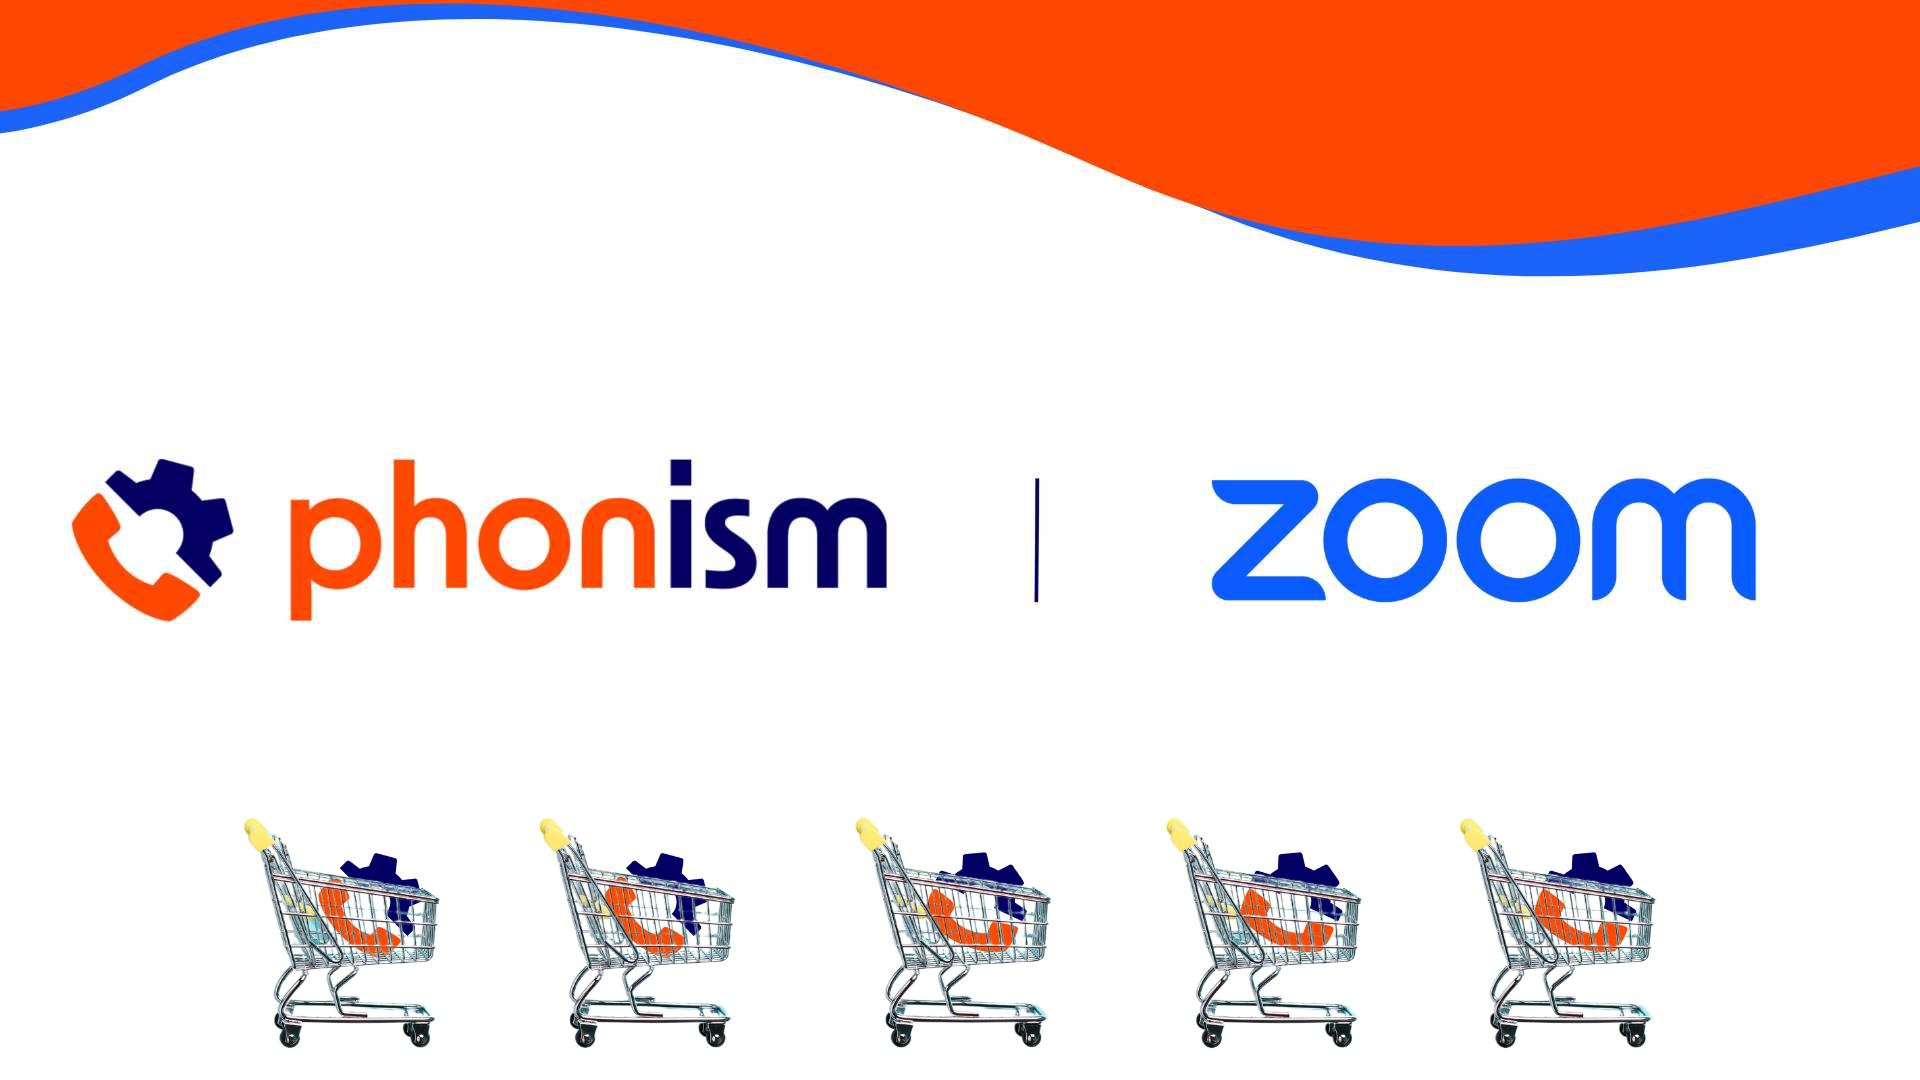 Adopt Zoom Faster Easy Migrations from any Platform No Need to Buy Devices (3)